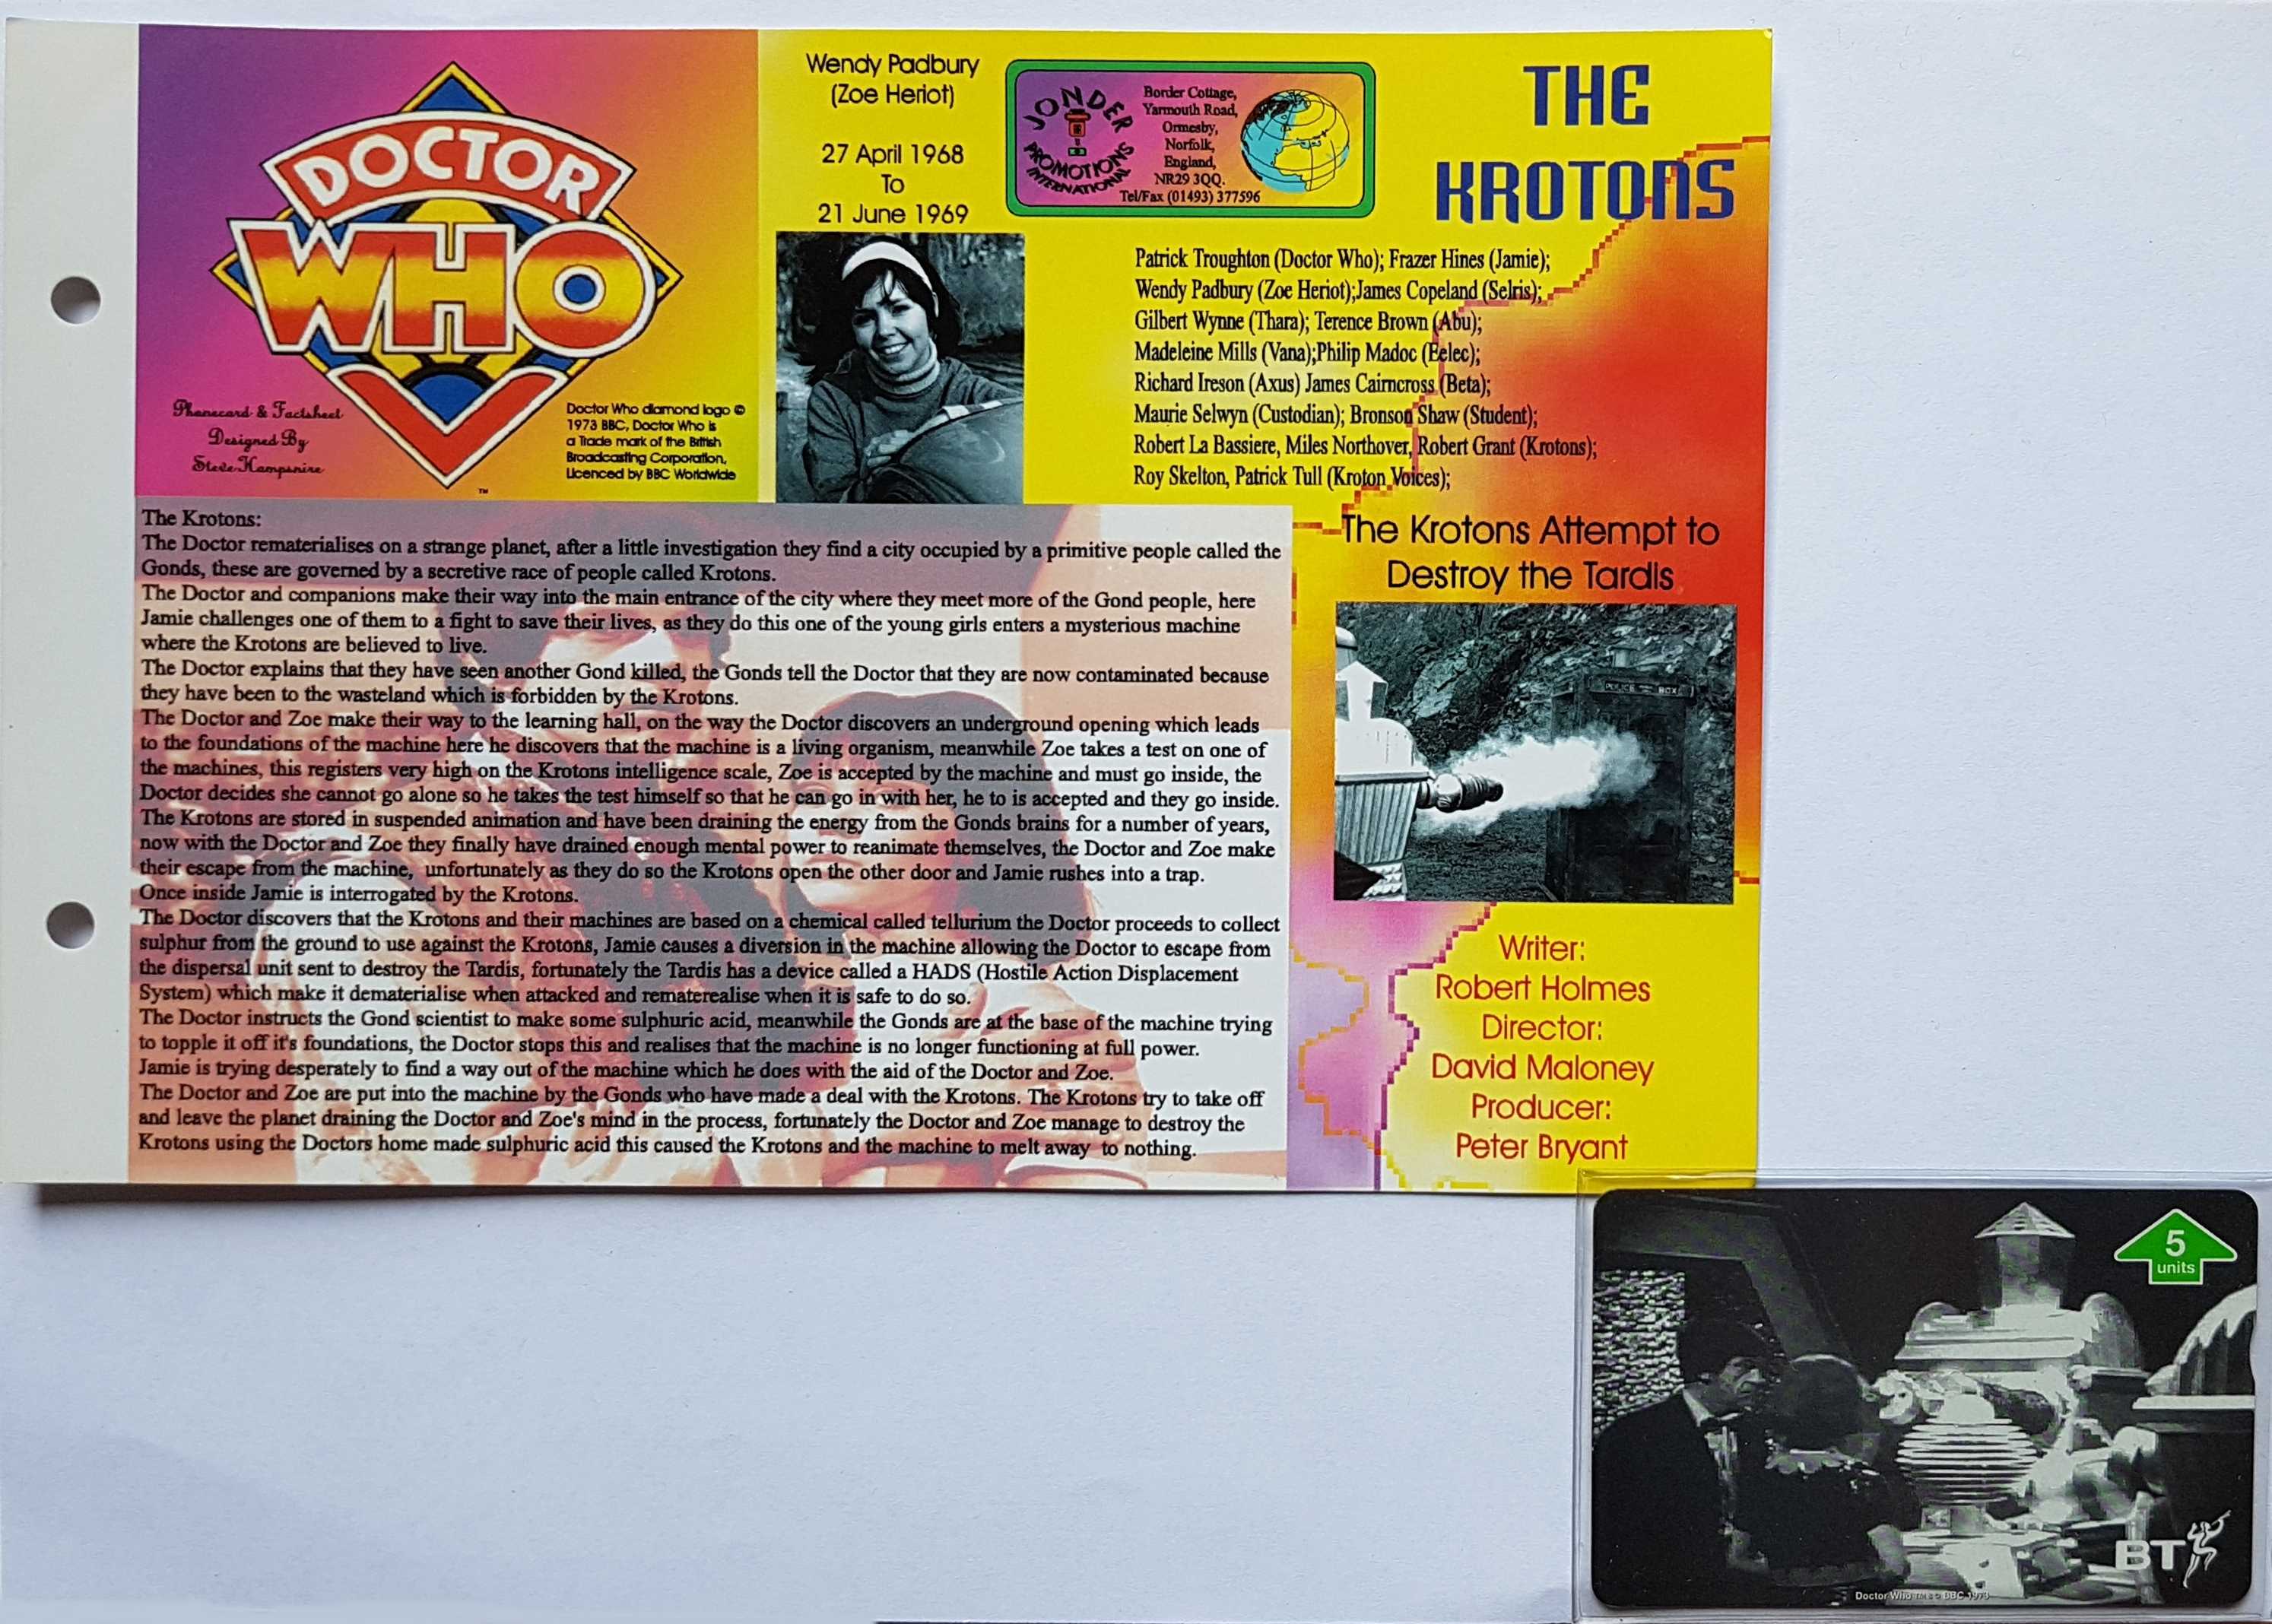 Picture of PC-BTG585 Doctor Who - The Krotons - Phone card by artist  from the BBC records and Tapes library